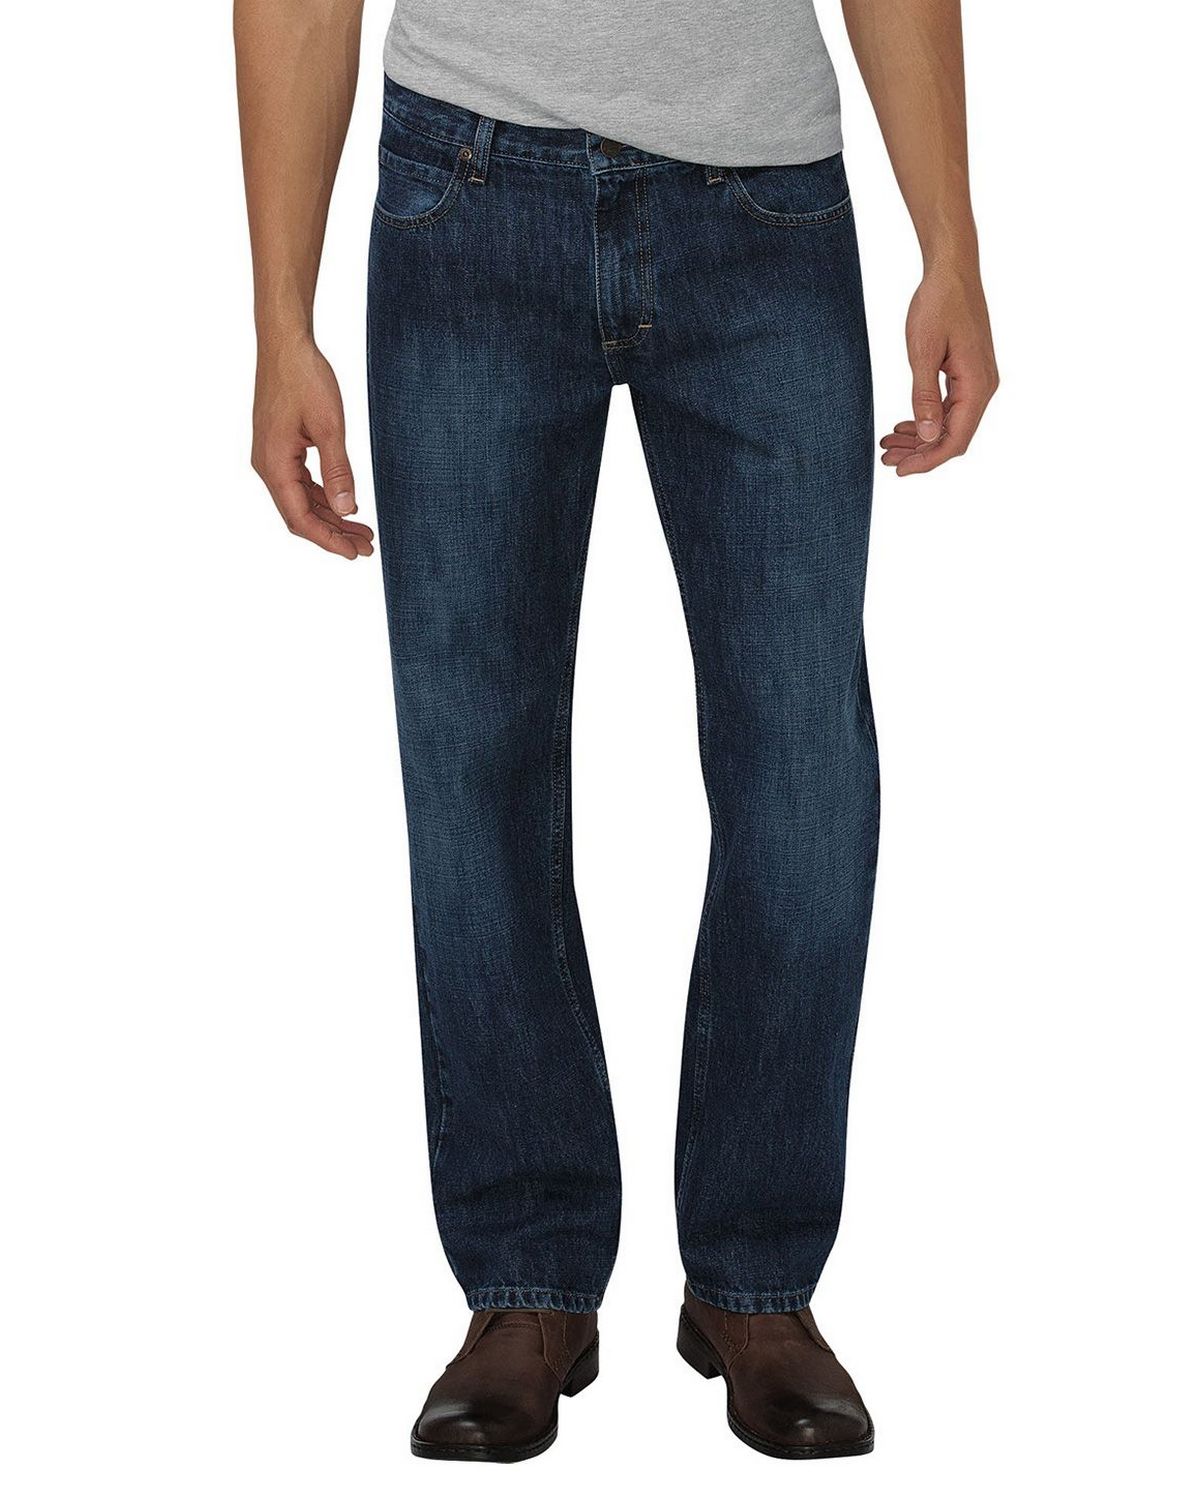 UPC 889440153640 product image for Dickies XD740 Mens X-Series Relaxed Fit Straight-Leg 5-Pocket Denim Jean Pant -  | upcitemdb.com